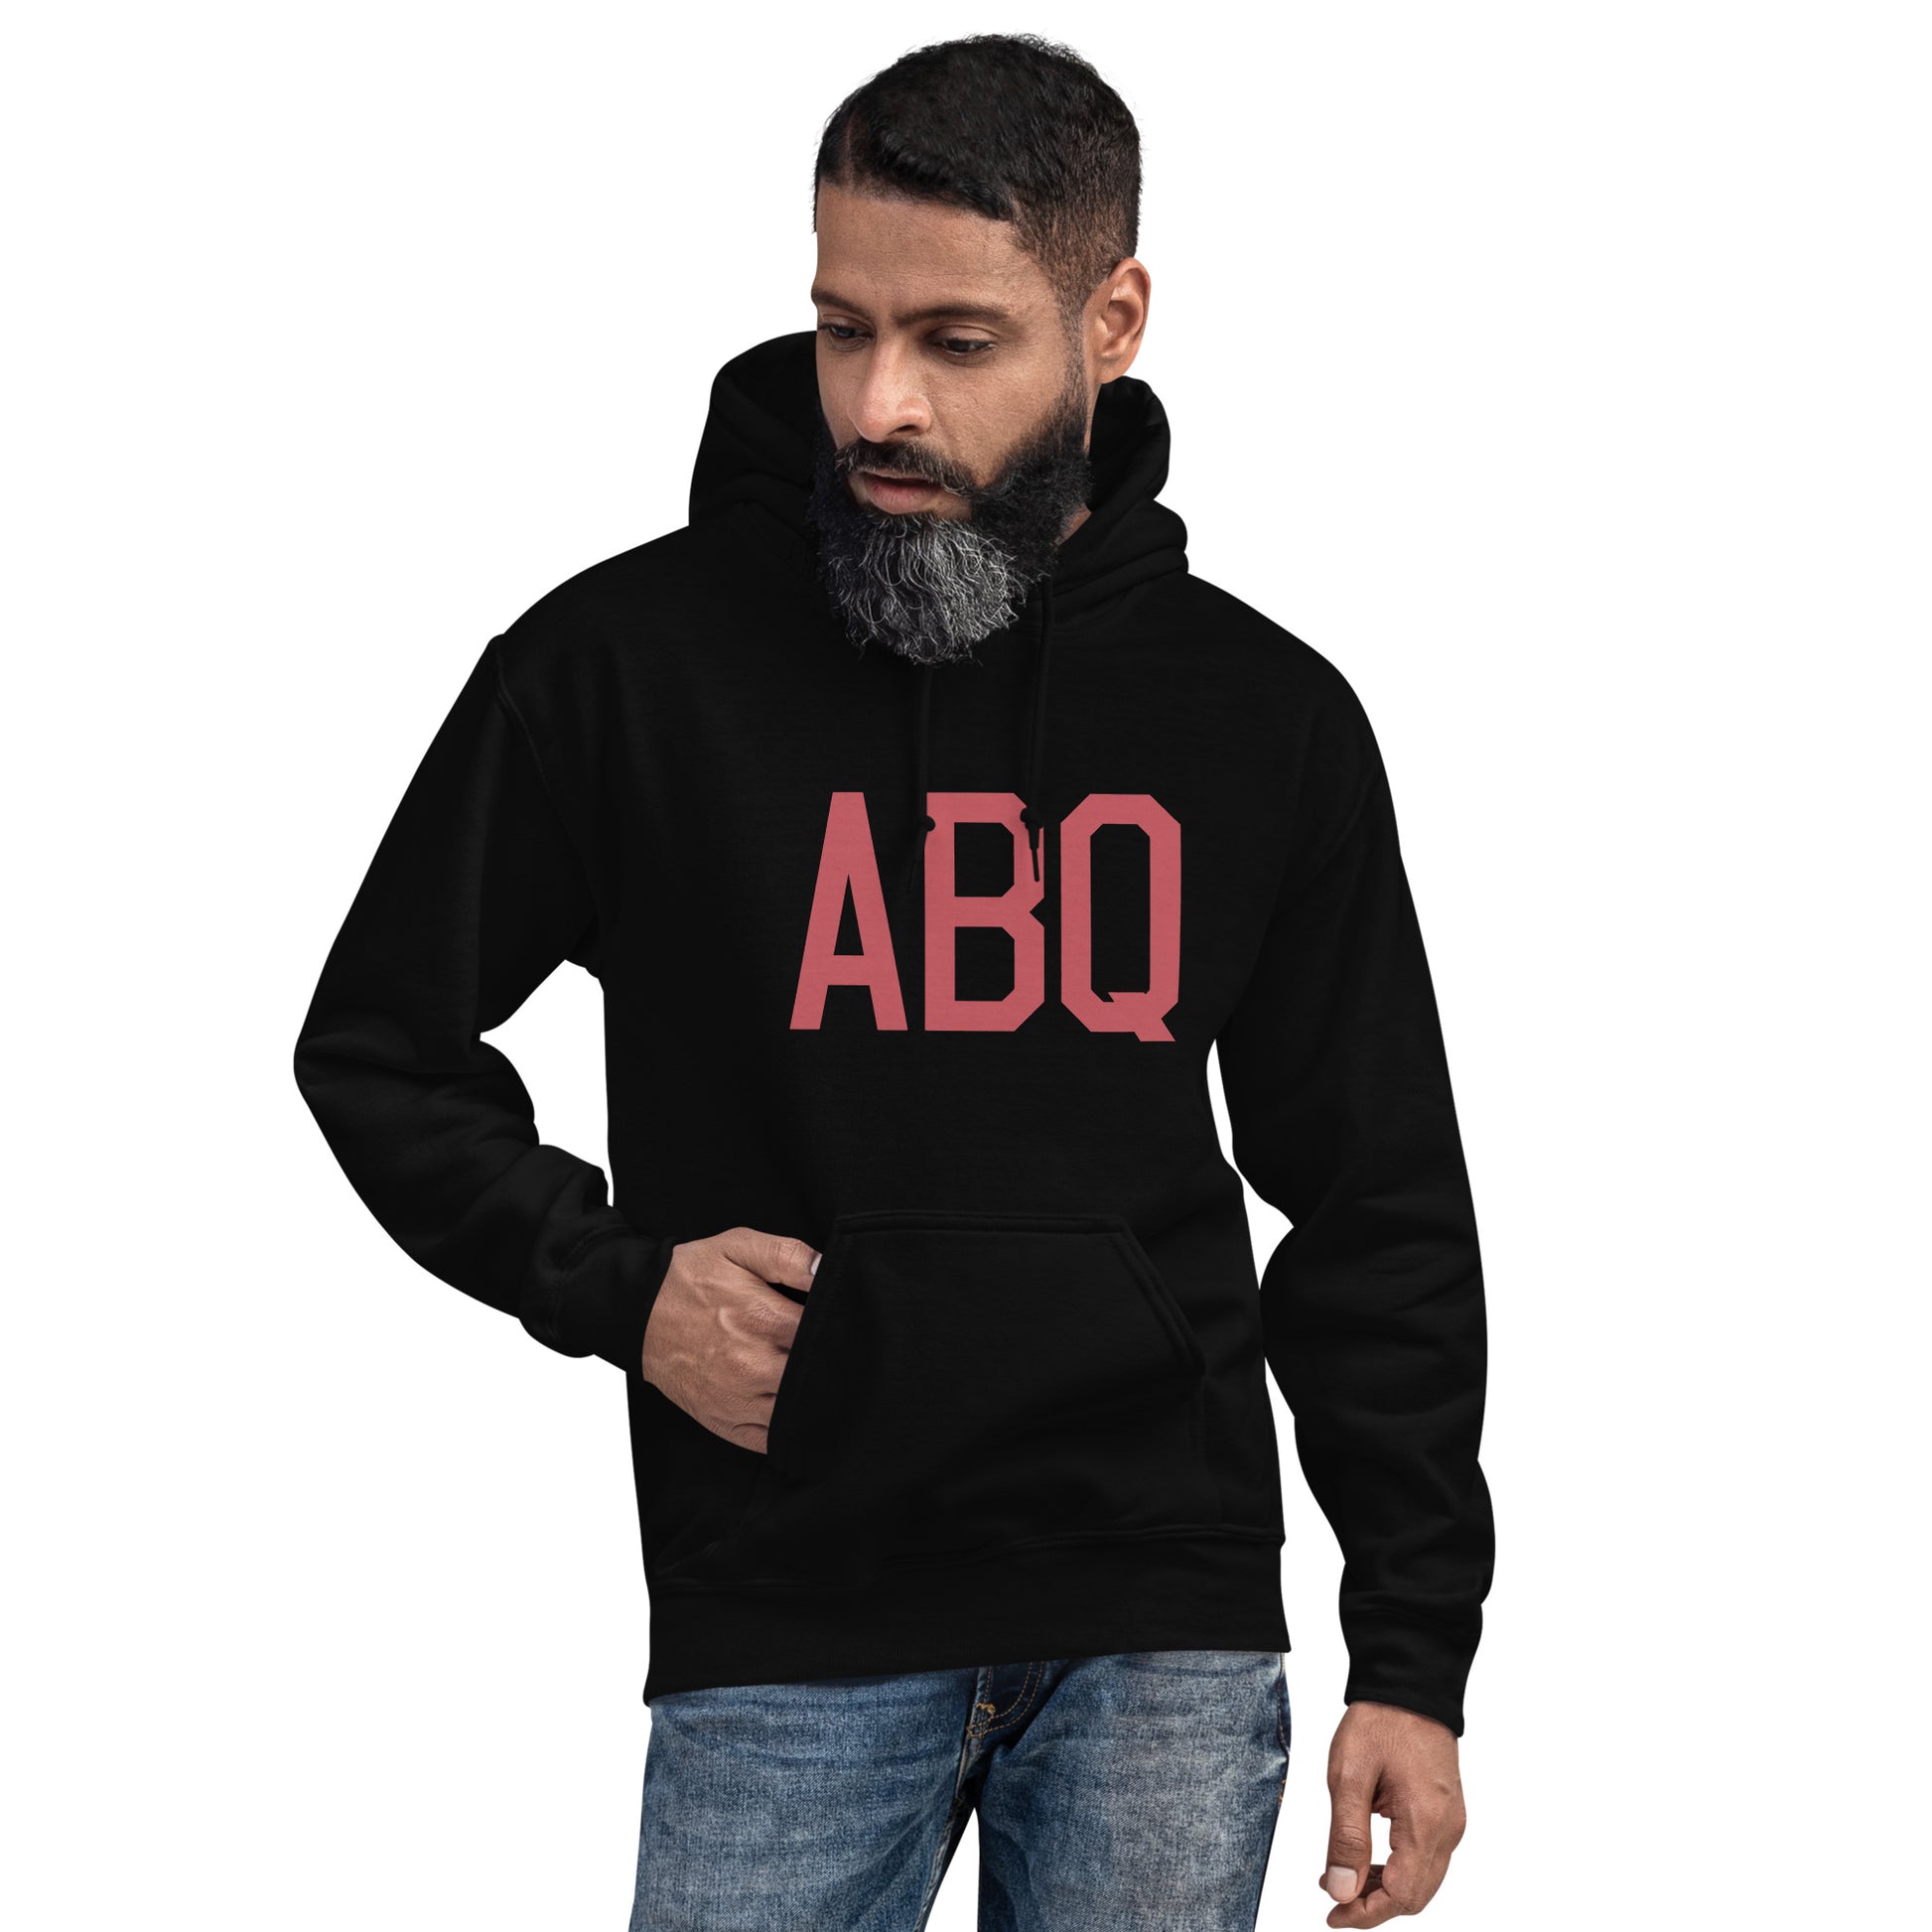 Aviation Enthusiast Hoodie - Deep Pink Graphic • ABQ Albuquerque • YHM Designs - Image 05